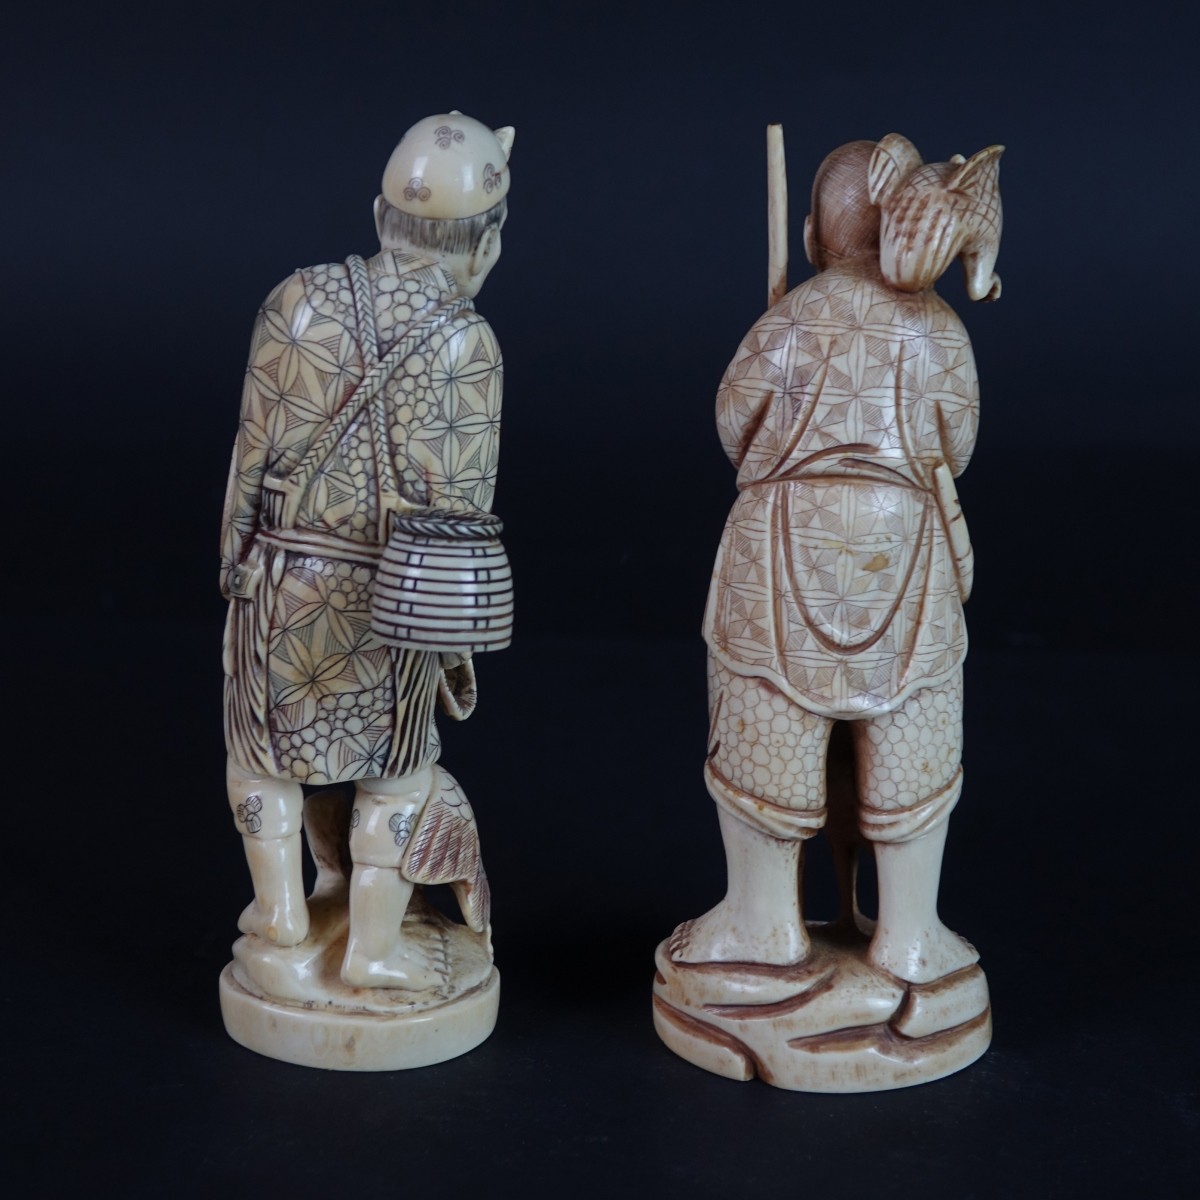 Two (2) Japanese Carved Figurines